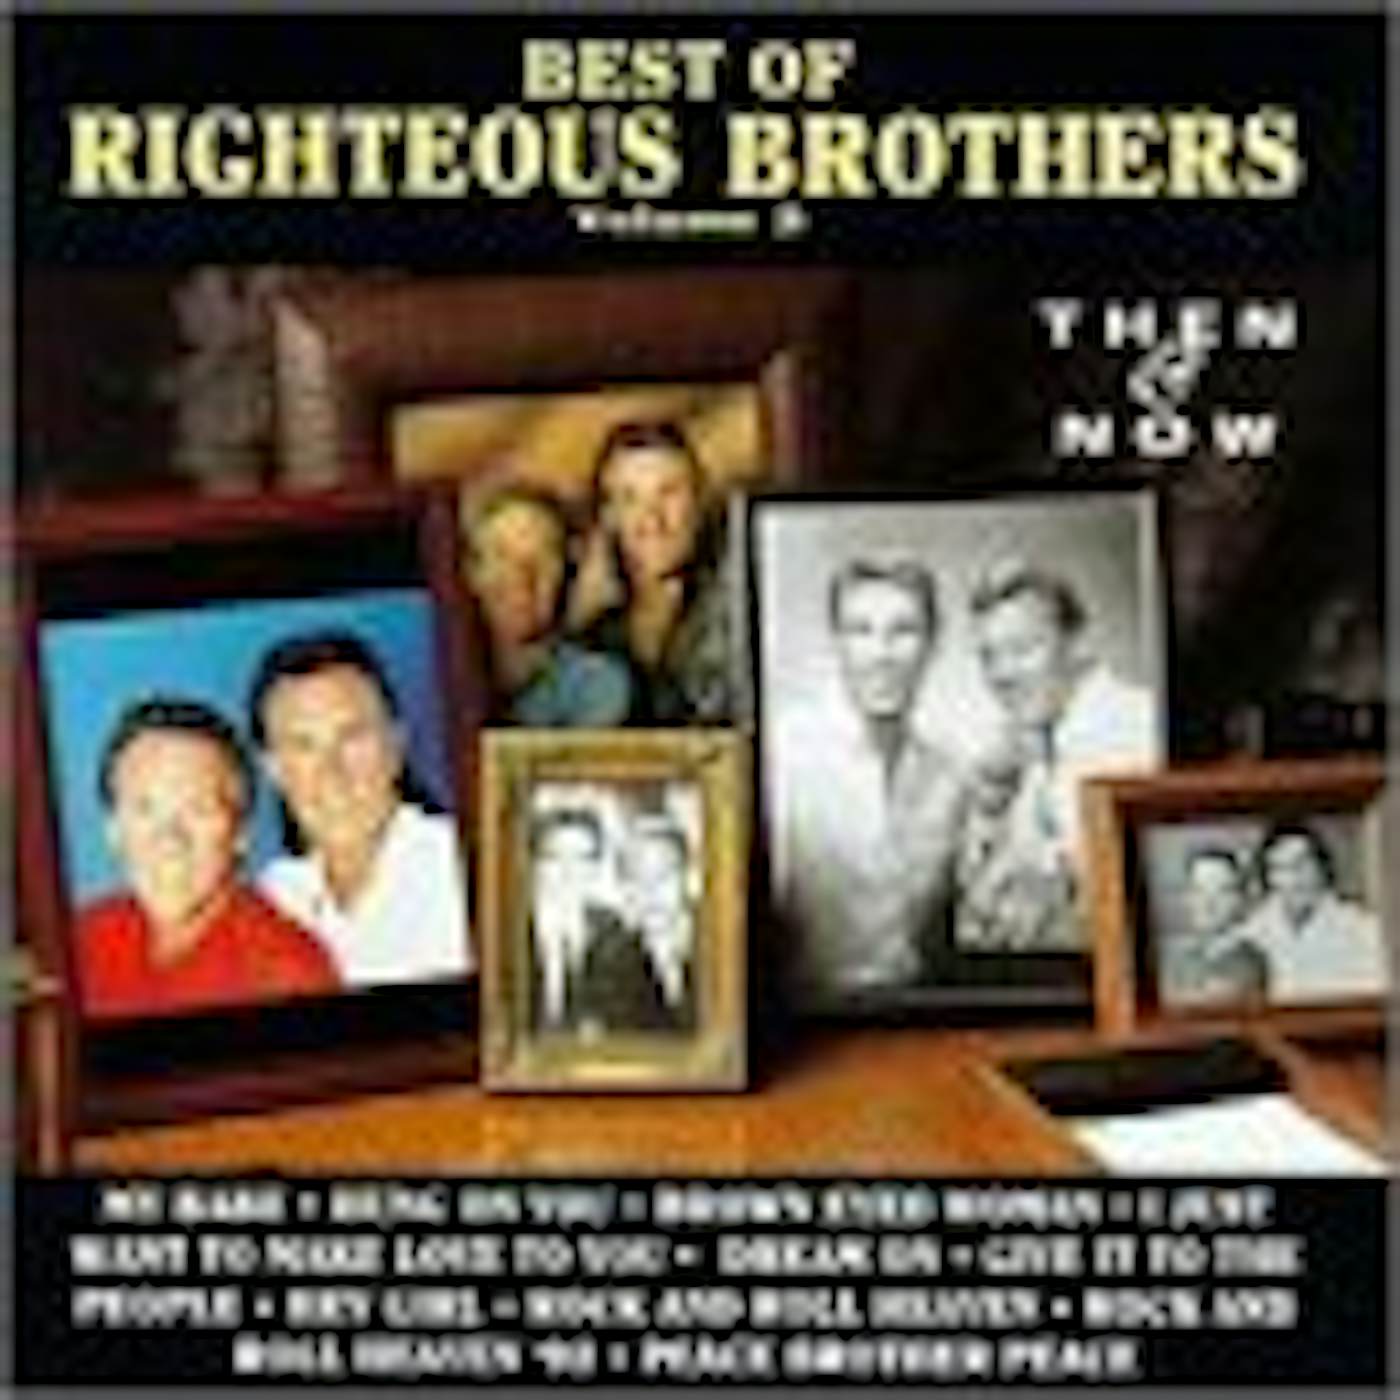 The Righteous Brothers BEST OF 2 CD